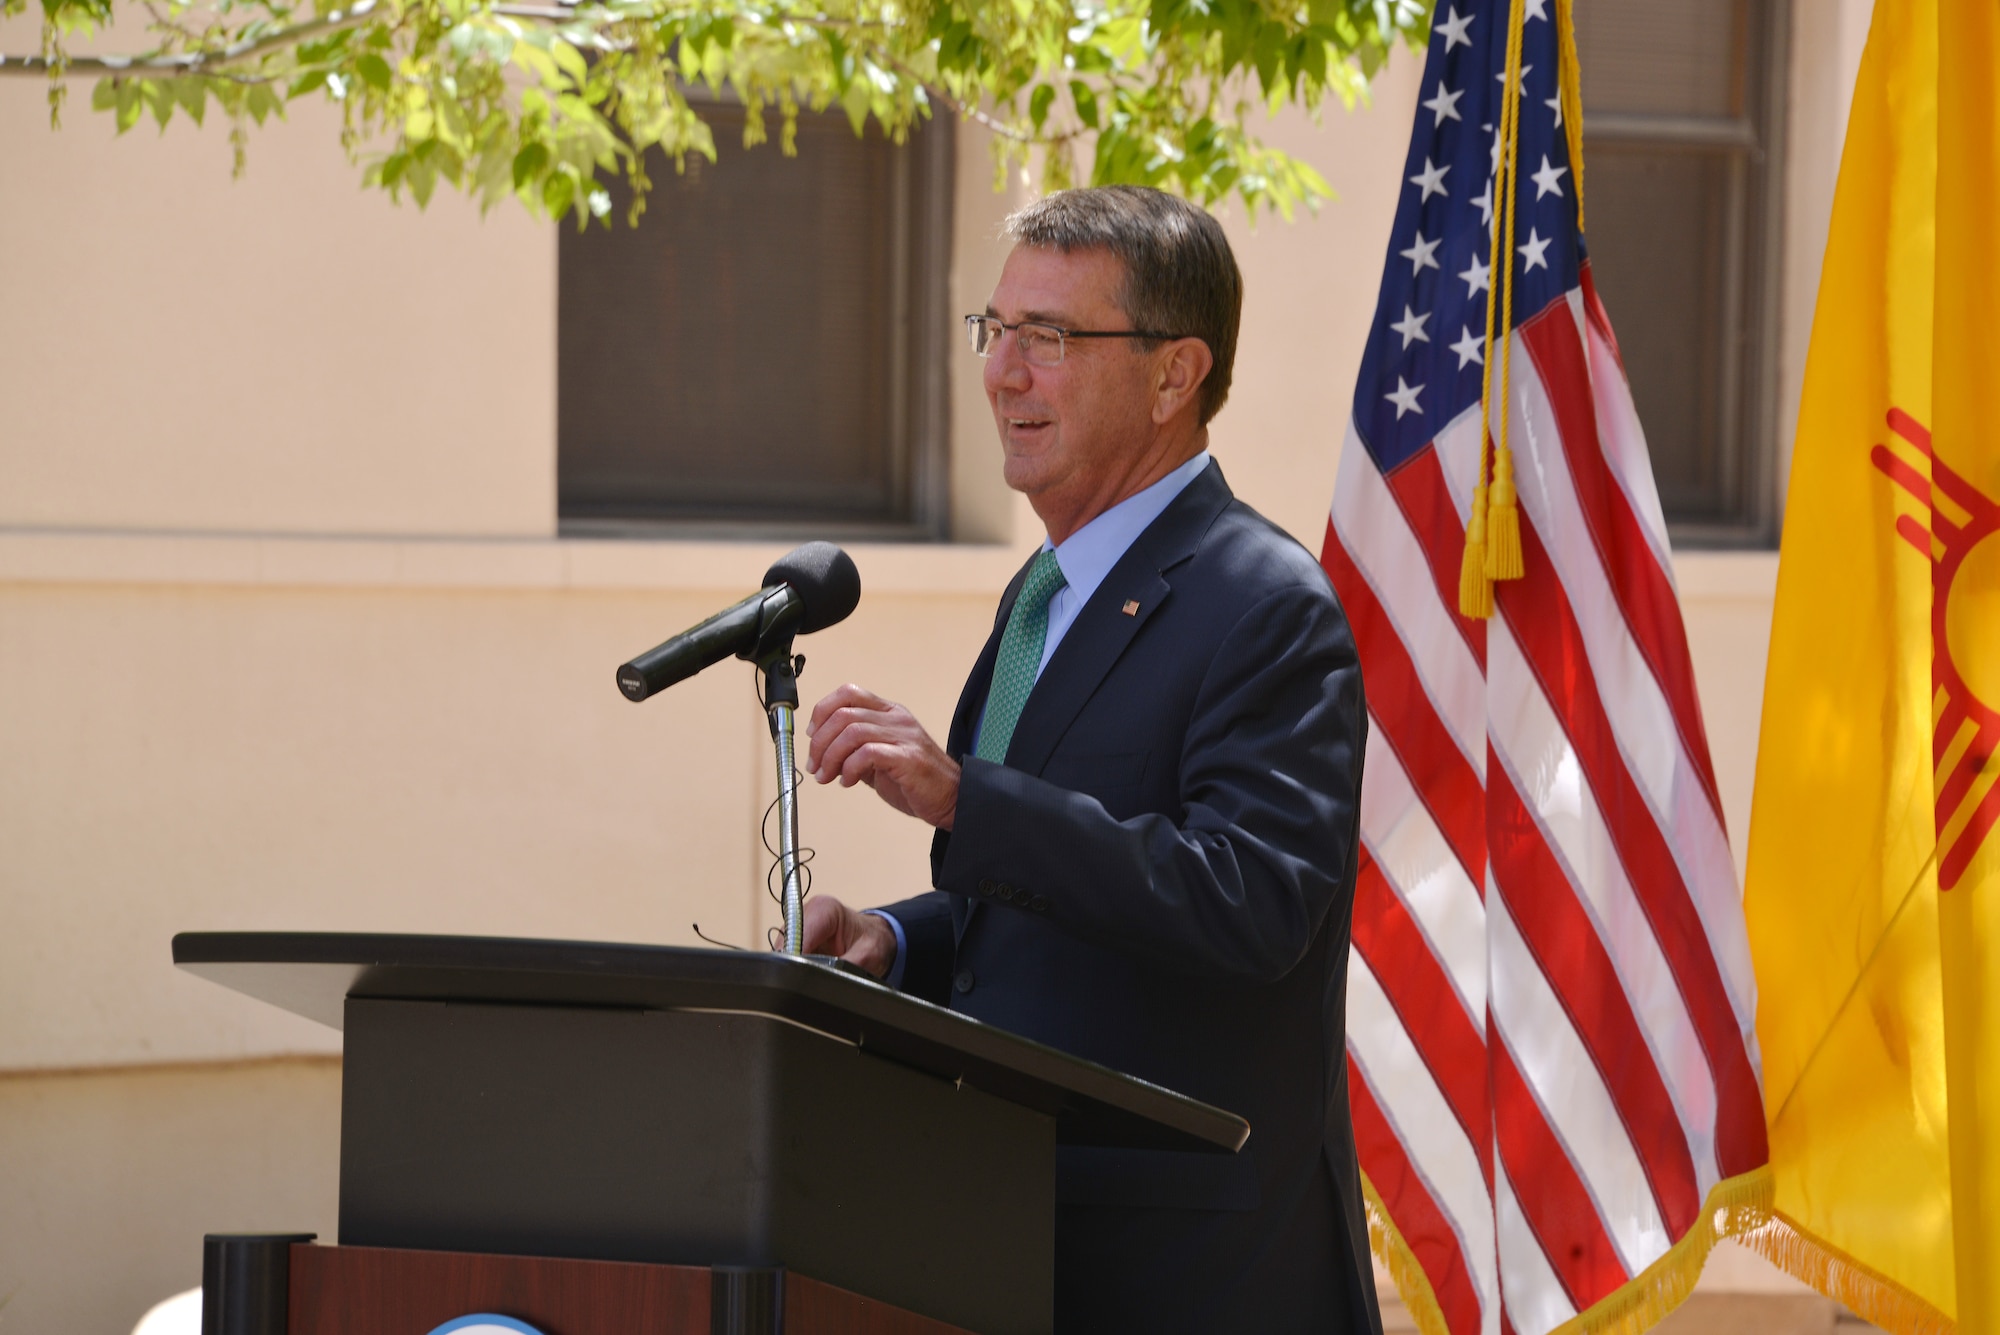 U.S. Secretary of Defense Ash Carter spoke to Airmen during a visit to Kirtland Air Force Base Sept. 27. He emphasized the importance of the nuclear enterprise and thanked the Airmen for their work in helping build a strong nuclear deterrent. (Photo by Dennis Carlson)